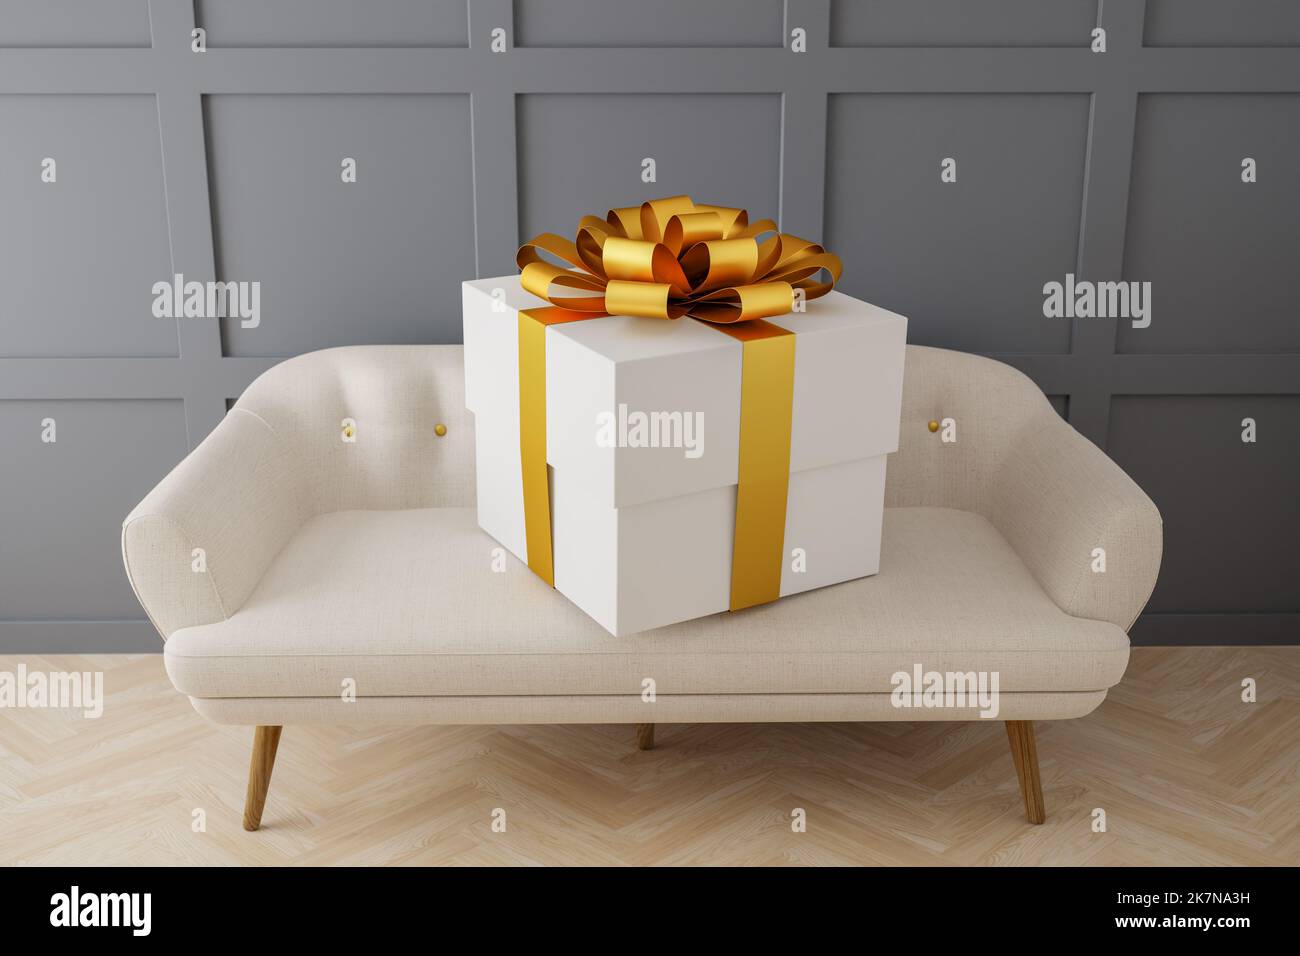 An oversized present box on a sofa. High angle view. Concept for excessive giving. Stock Photo